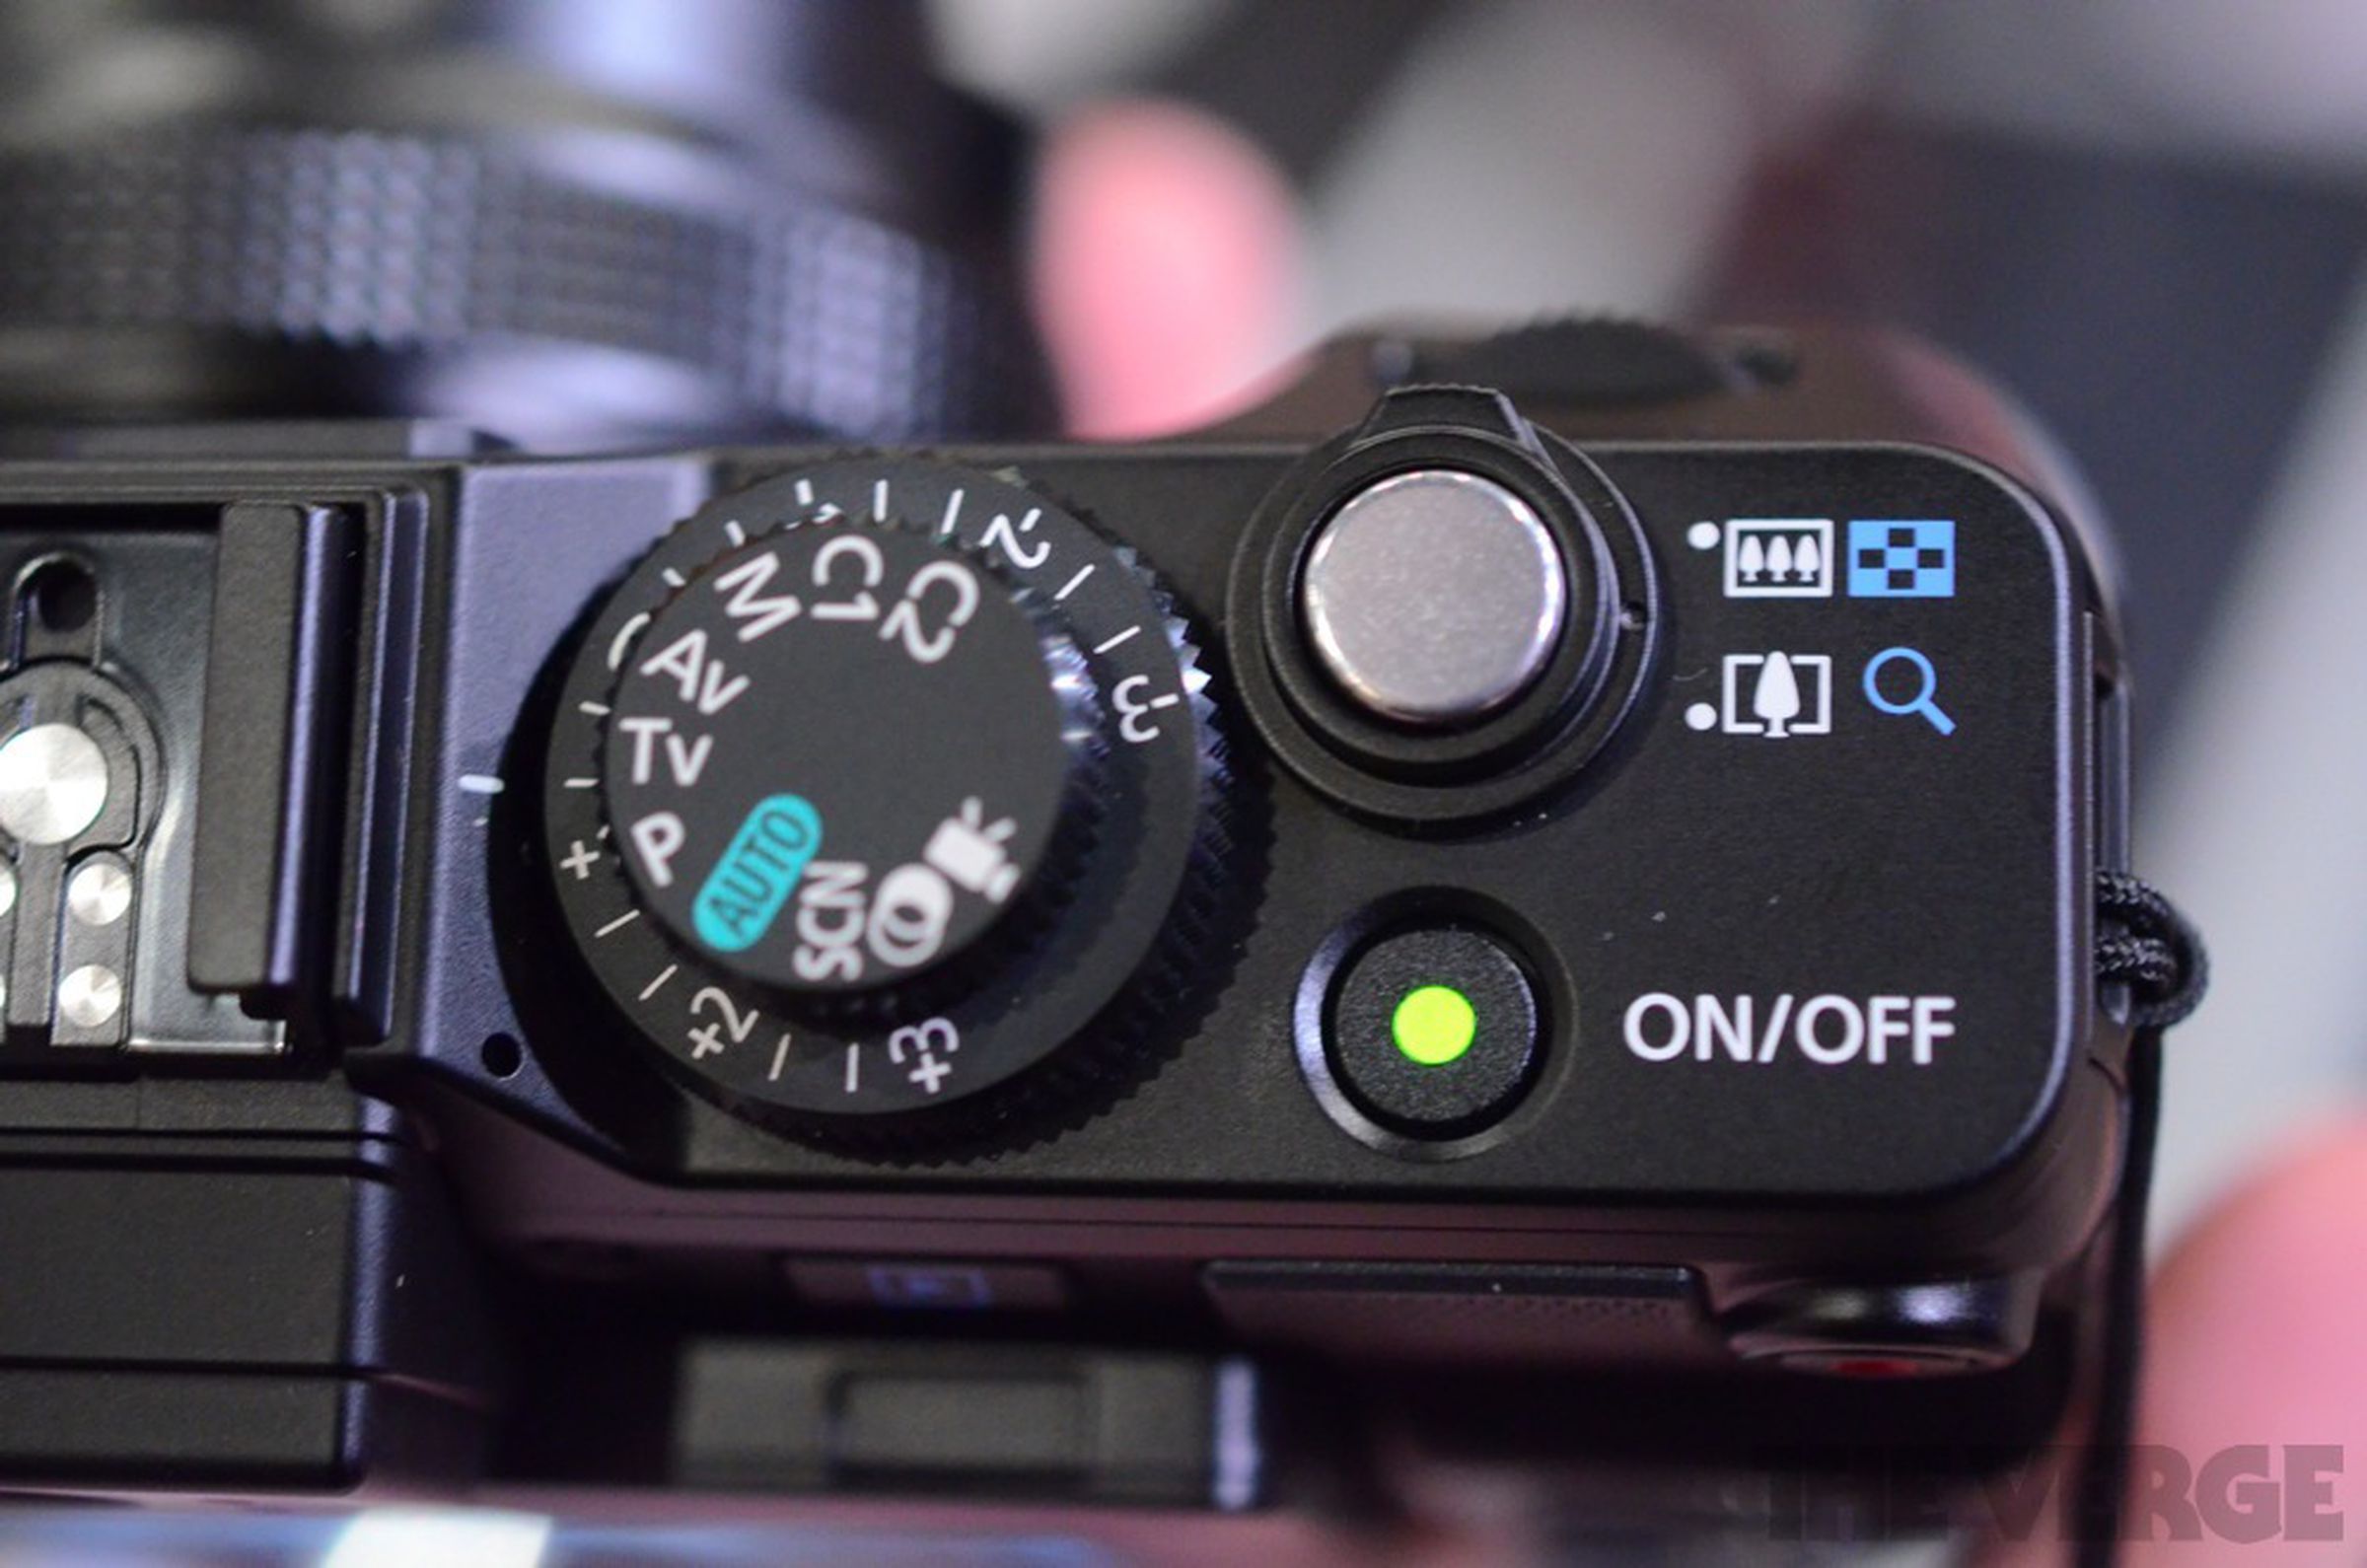 Canon PowerShot G1 X hands-on pictures